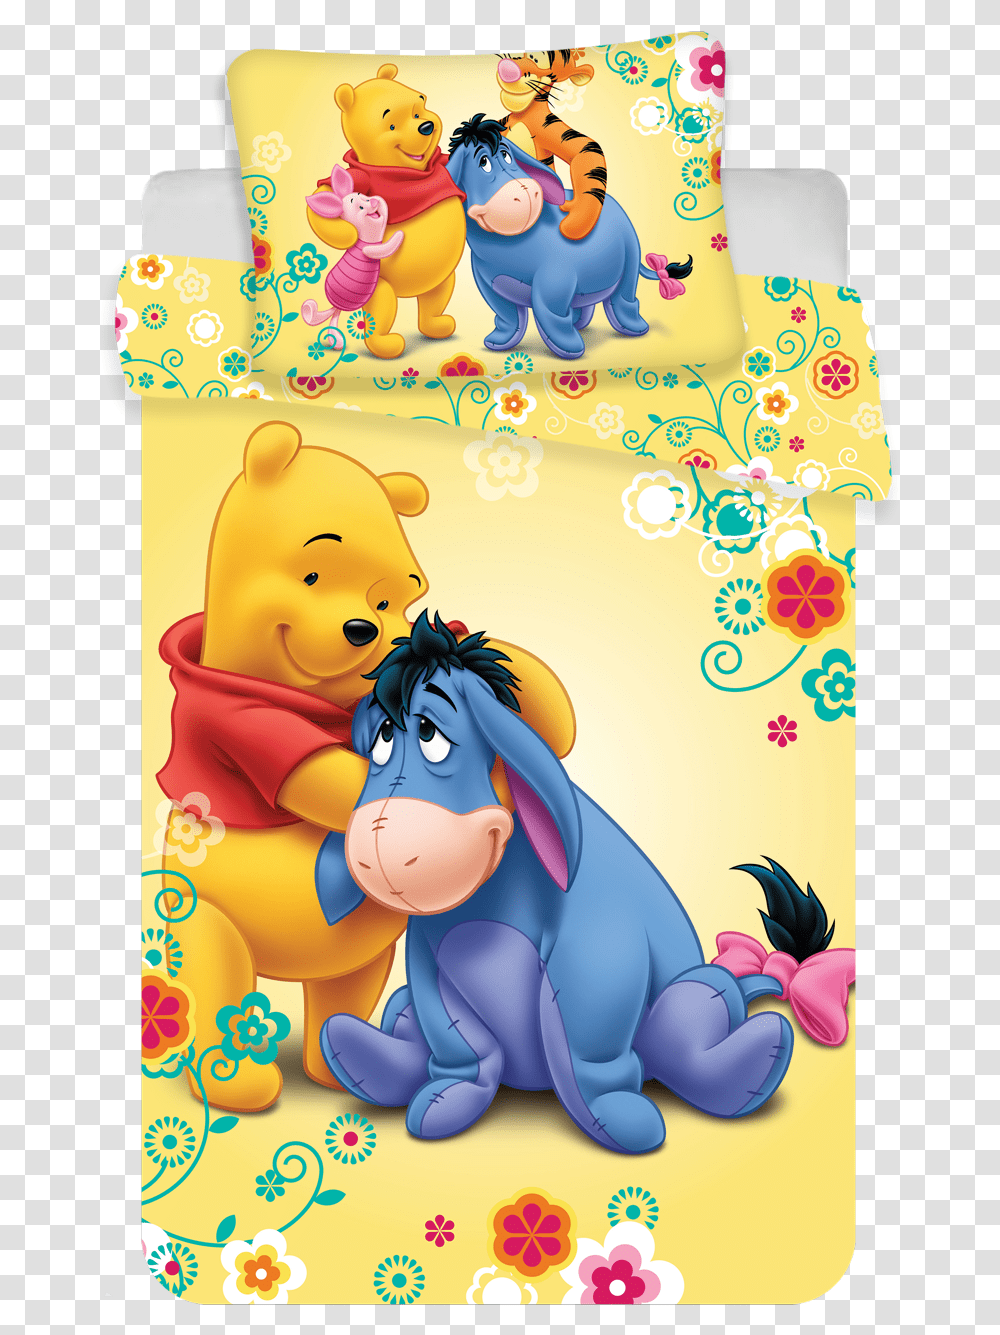 Winnie The Pooh Baby Image Winnie The Pooh Yellow Bedding, Envelope, Mail Transparent Png